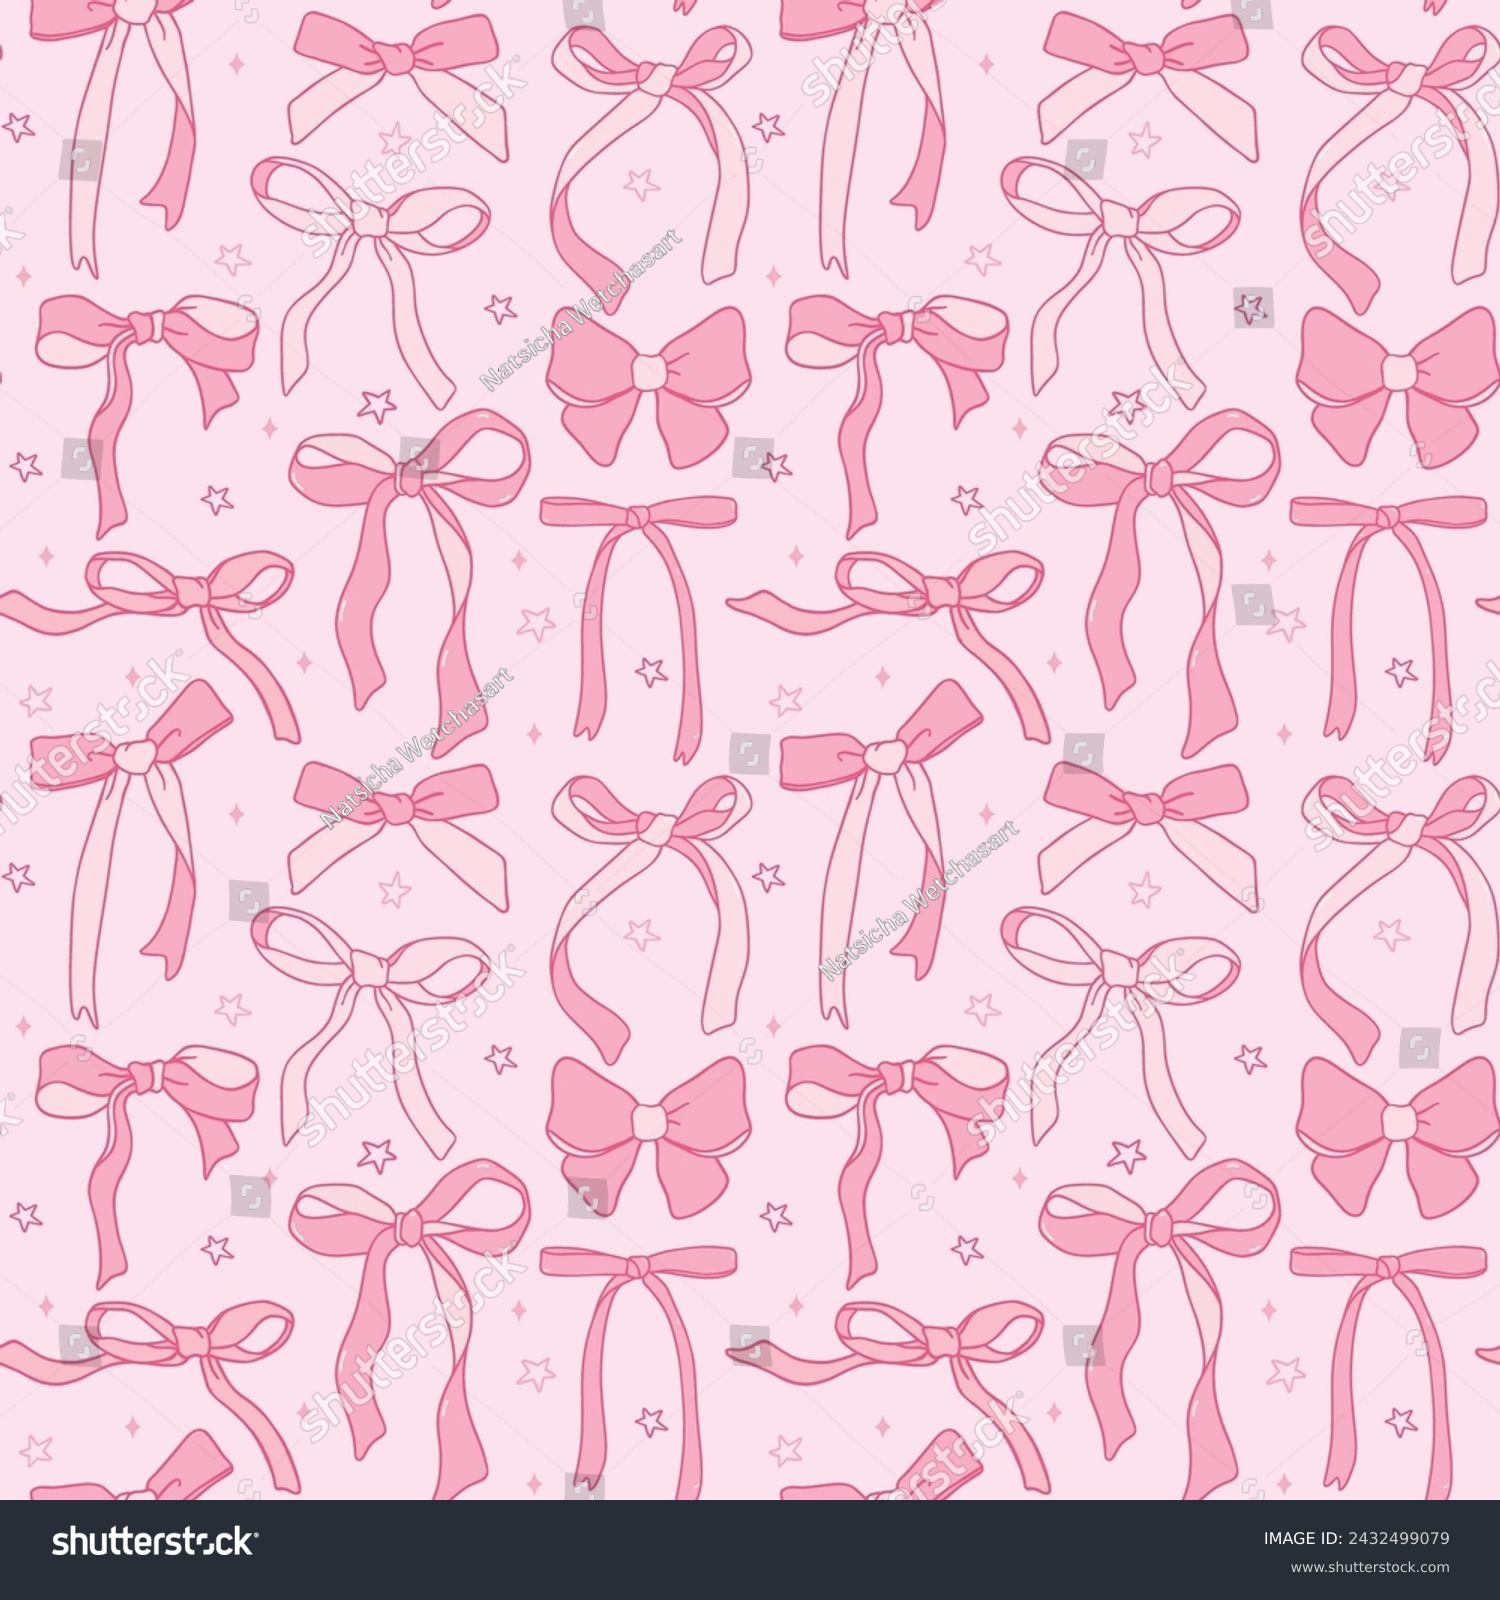 cute coquette ribbon bow pattern seamless doodle outline isolated on pink background.	
 #2432499079